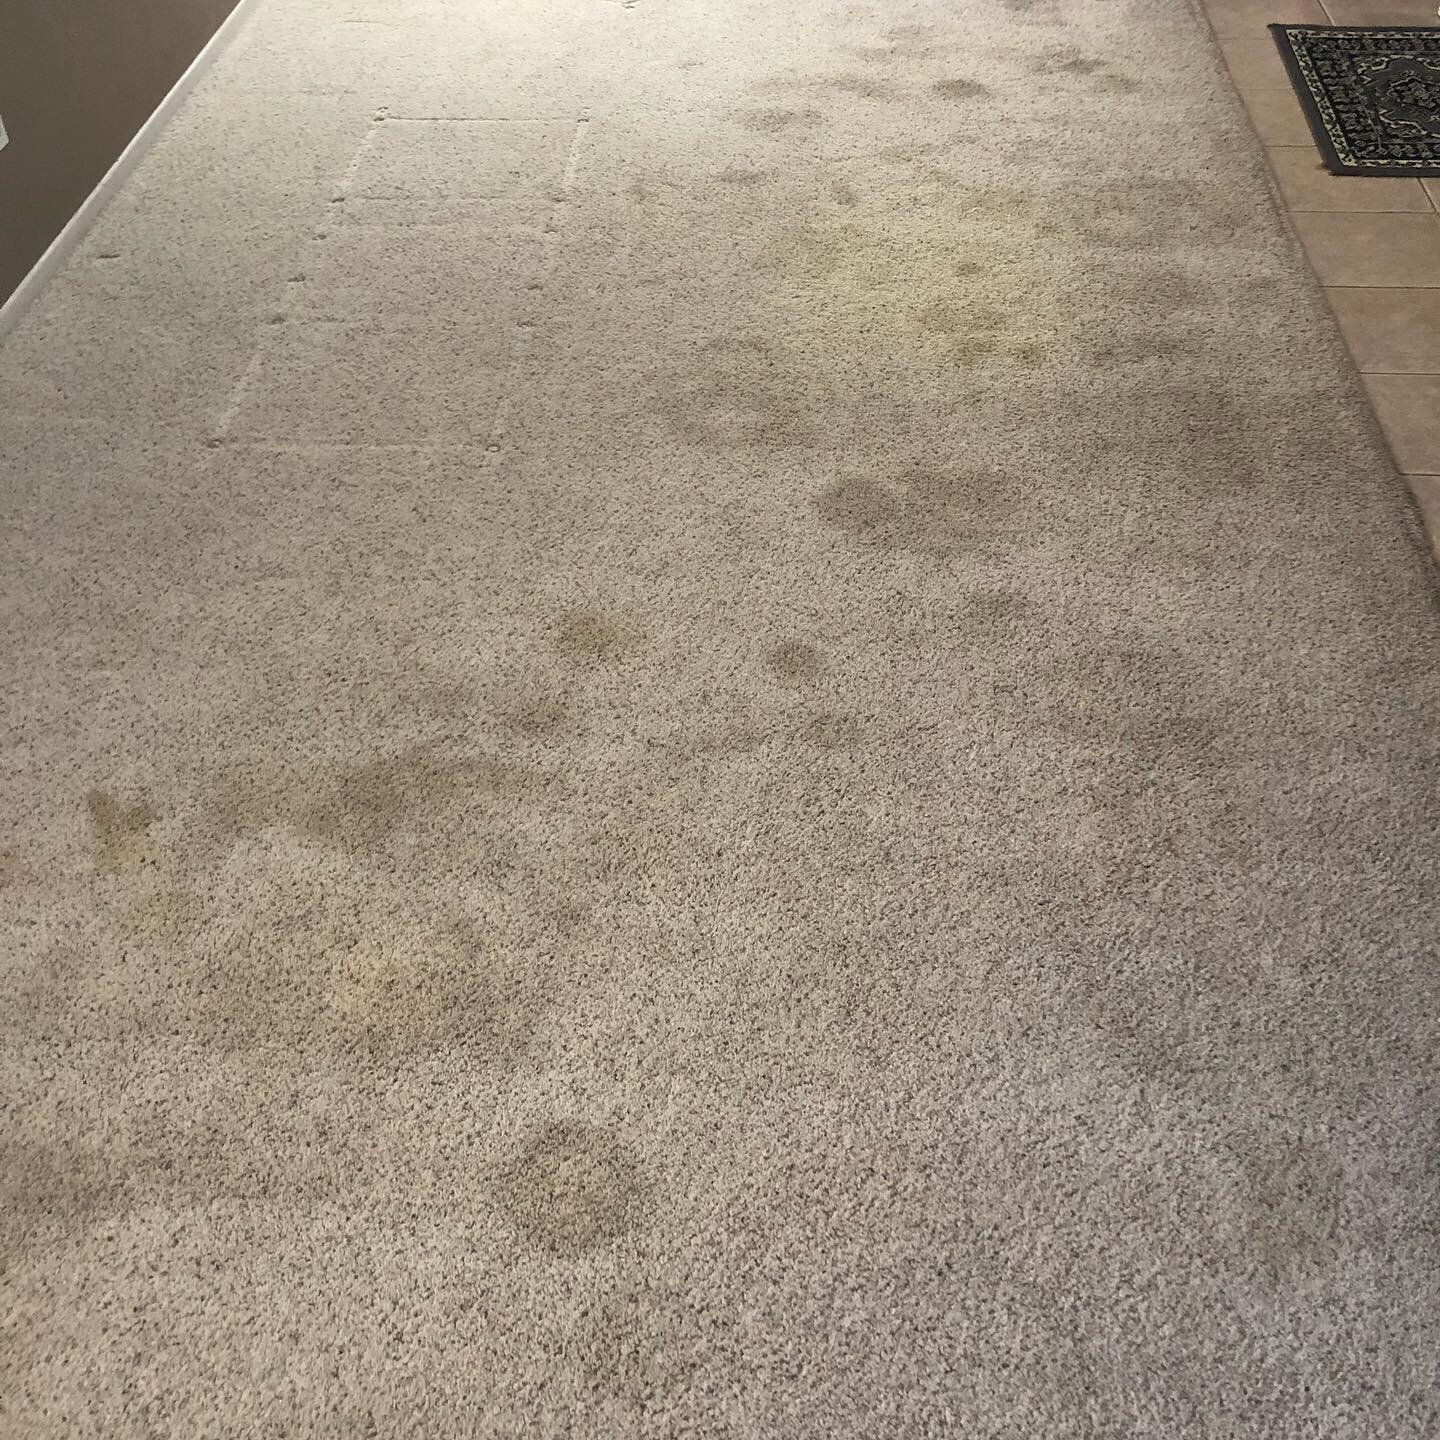 Pet stained carpet? Get your carpet renewed and sanitized for a low cost! #guaranteedcleansocal #carpetcleaning #sanitize #petstains